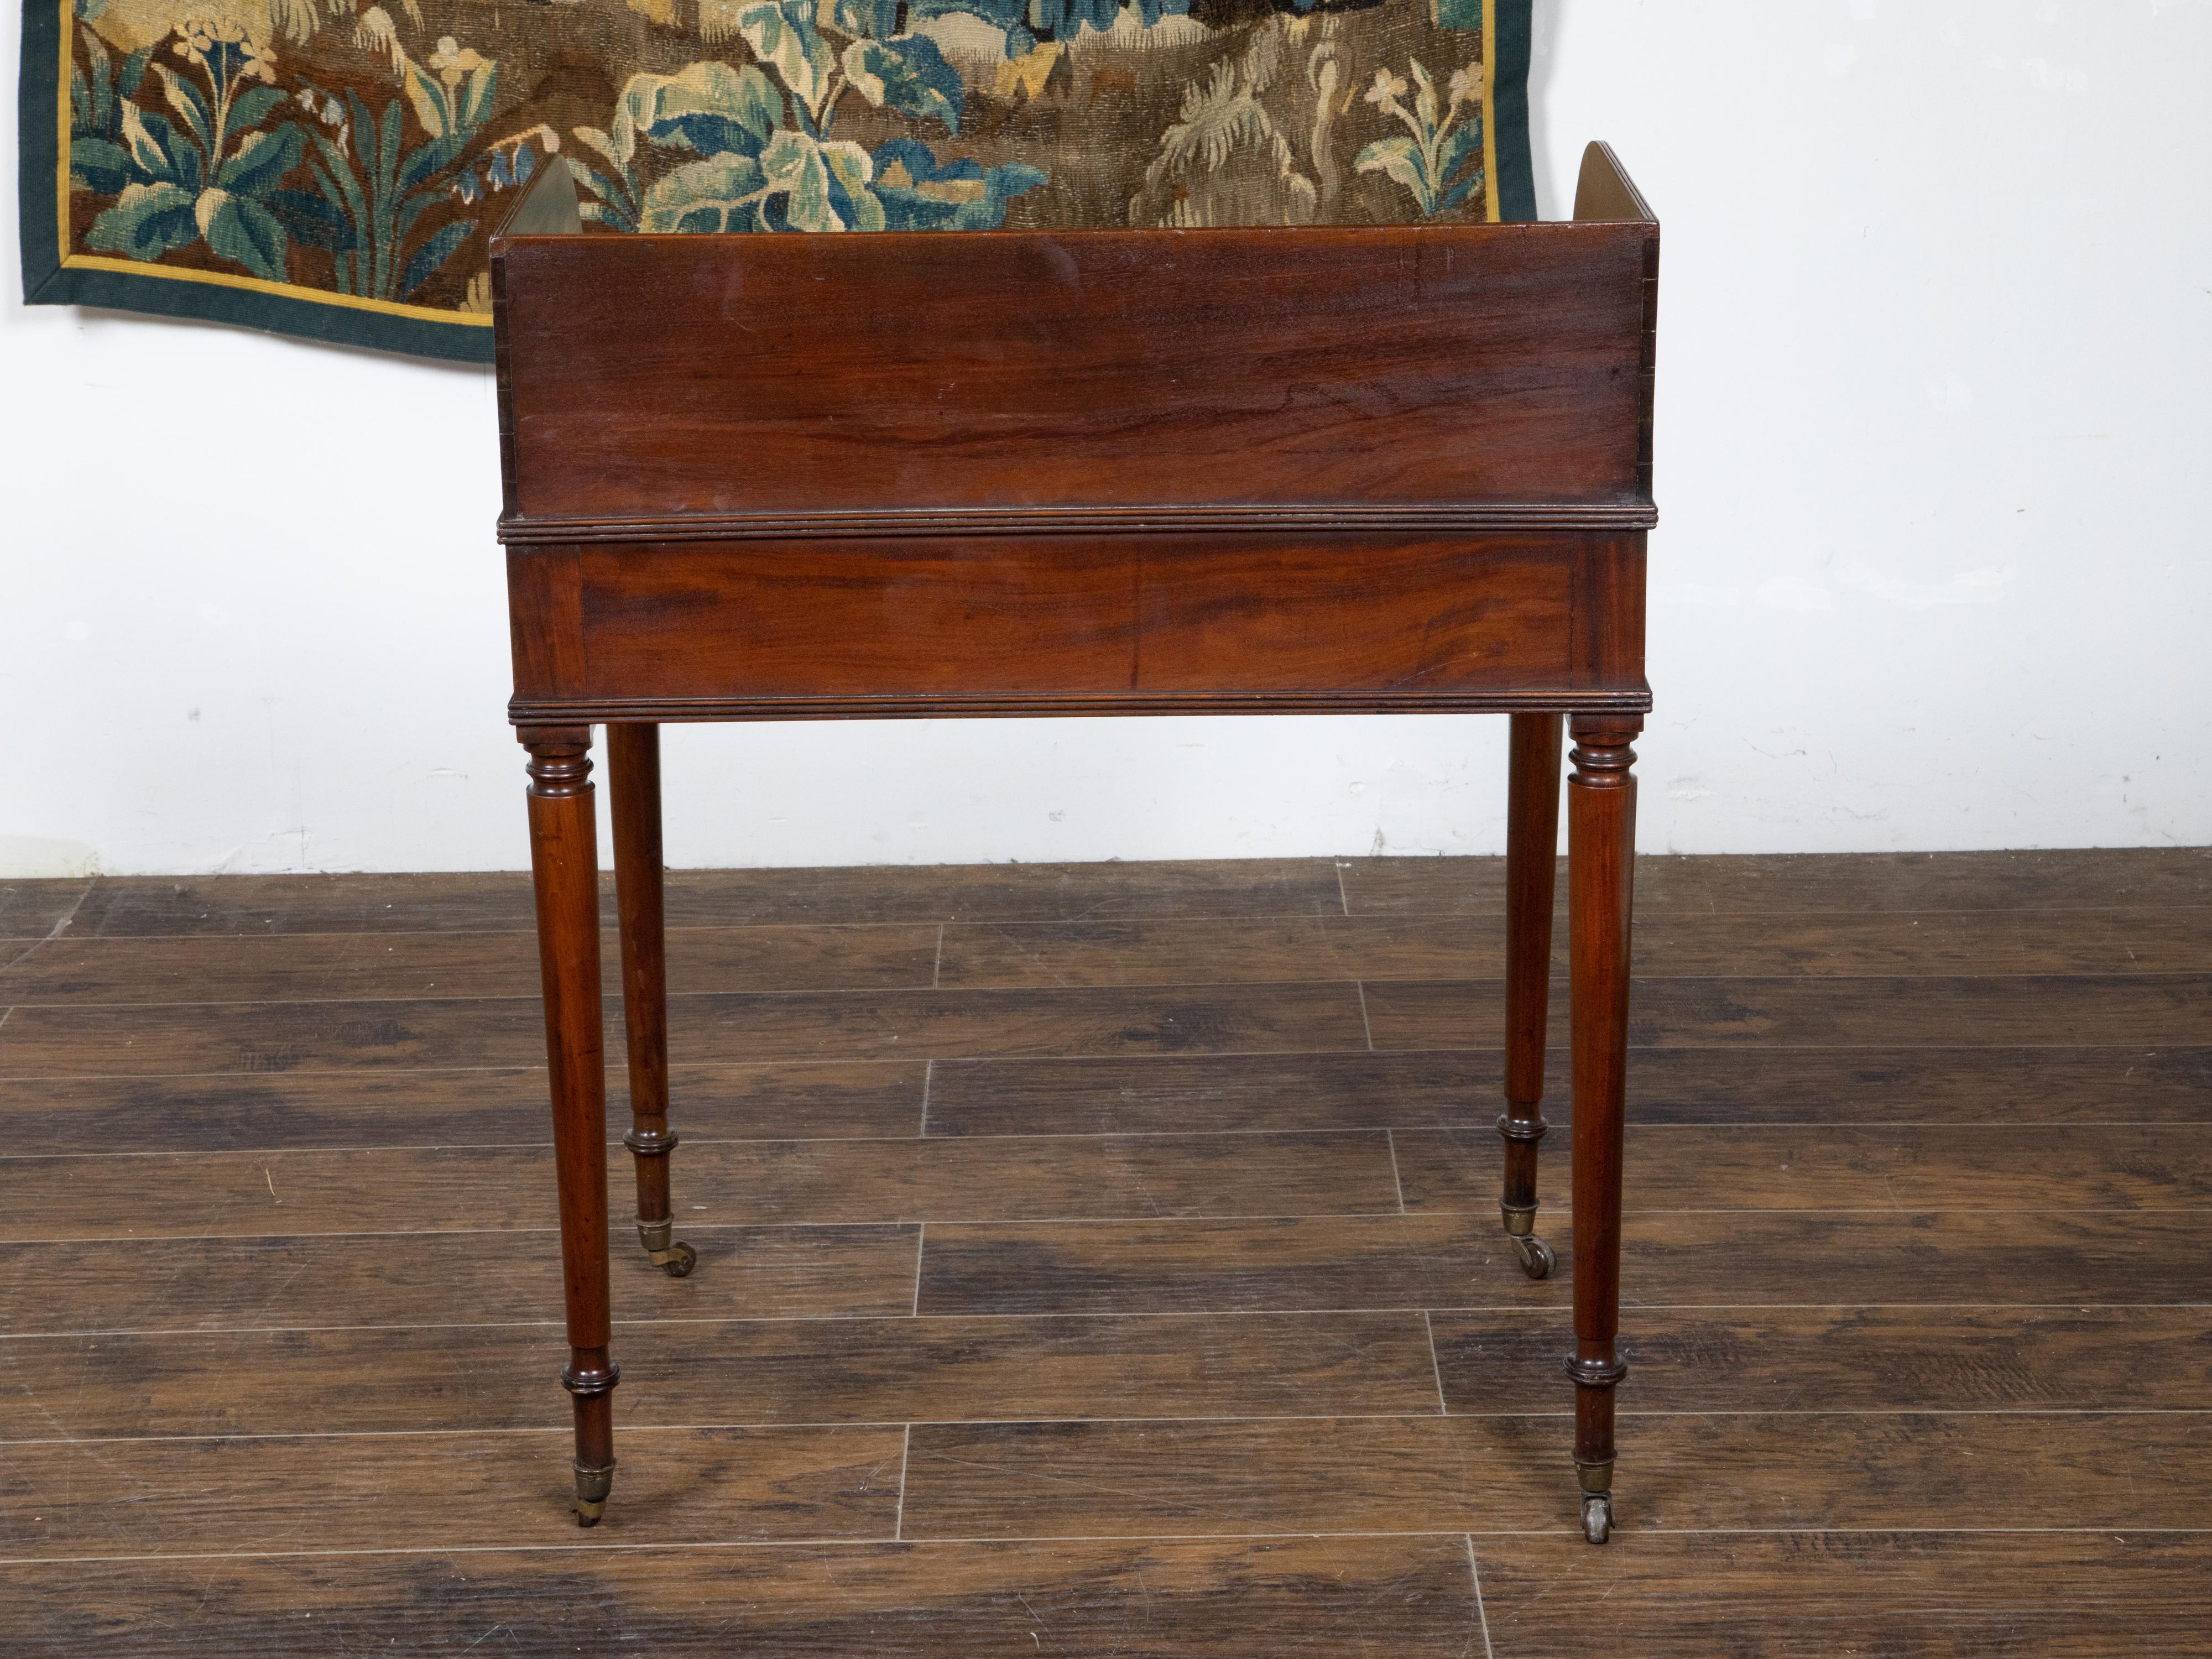 19th Century English Mahogany 1840s Washstand Table with Grey Marble Top on Casters